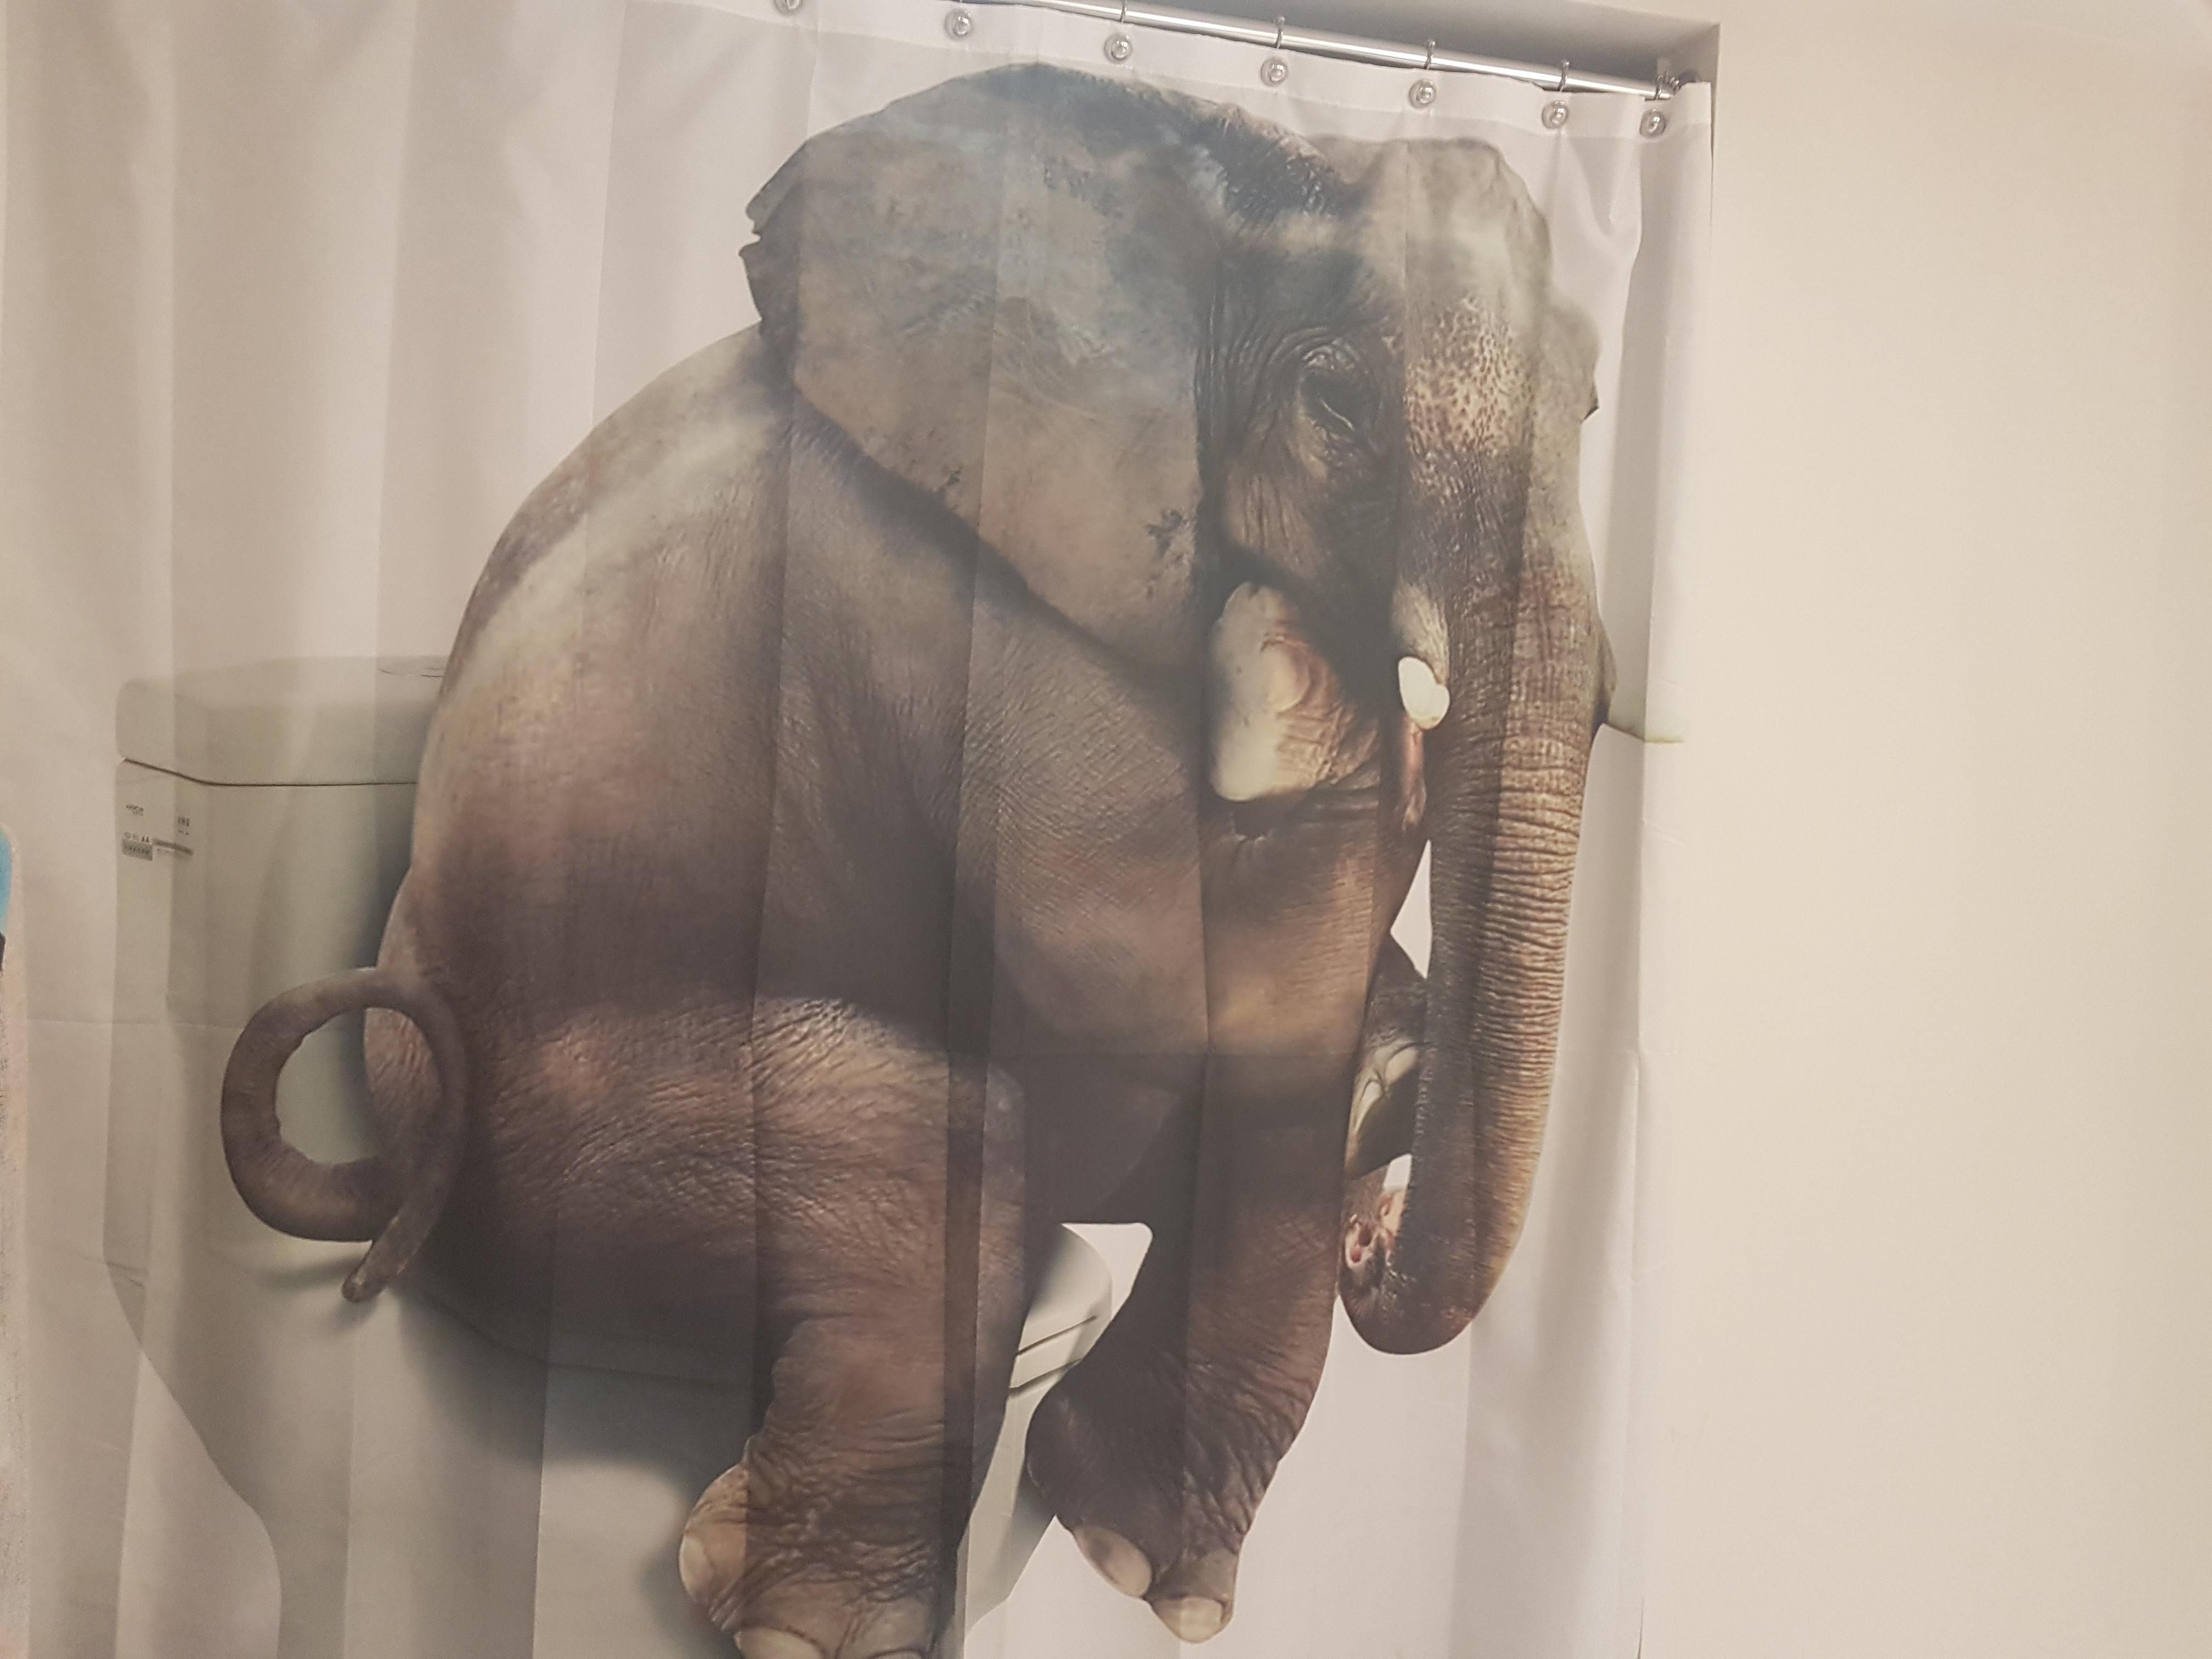 My girlfriend also let me choose our shower curtain.